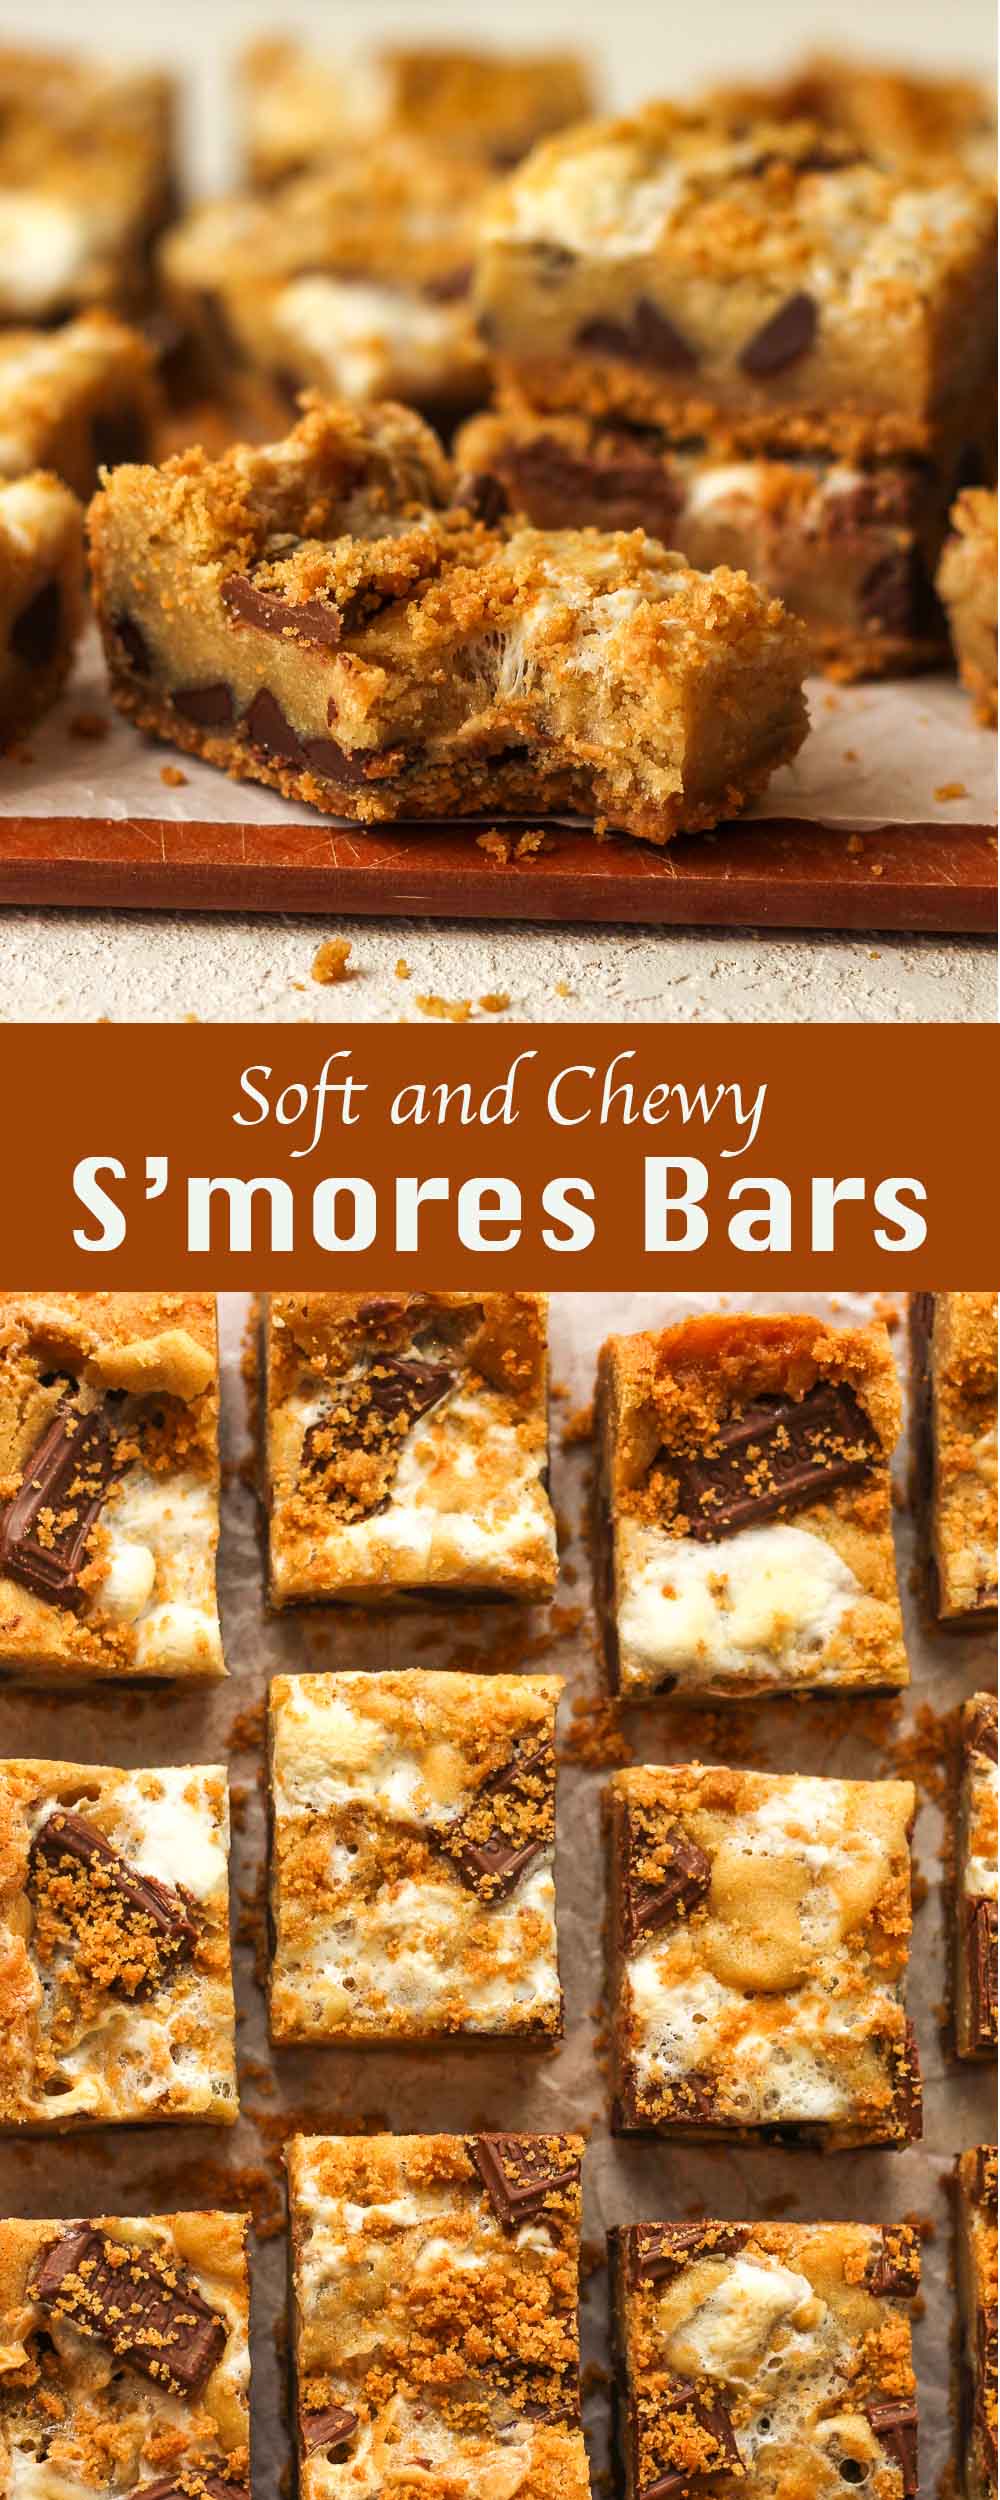 Two photos of soft and chewy S'mores Bars.